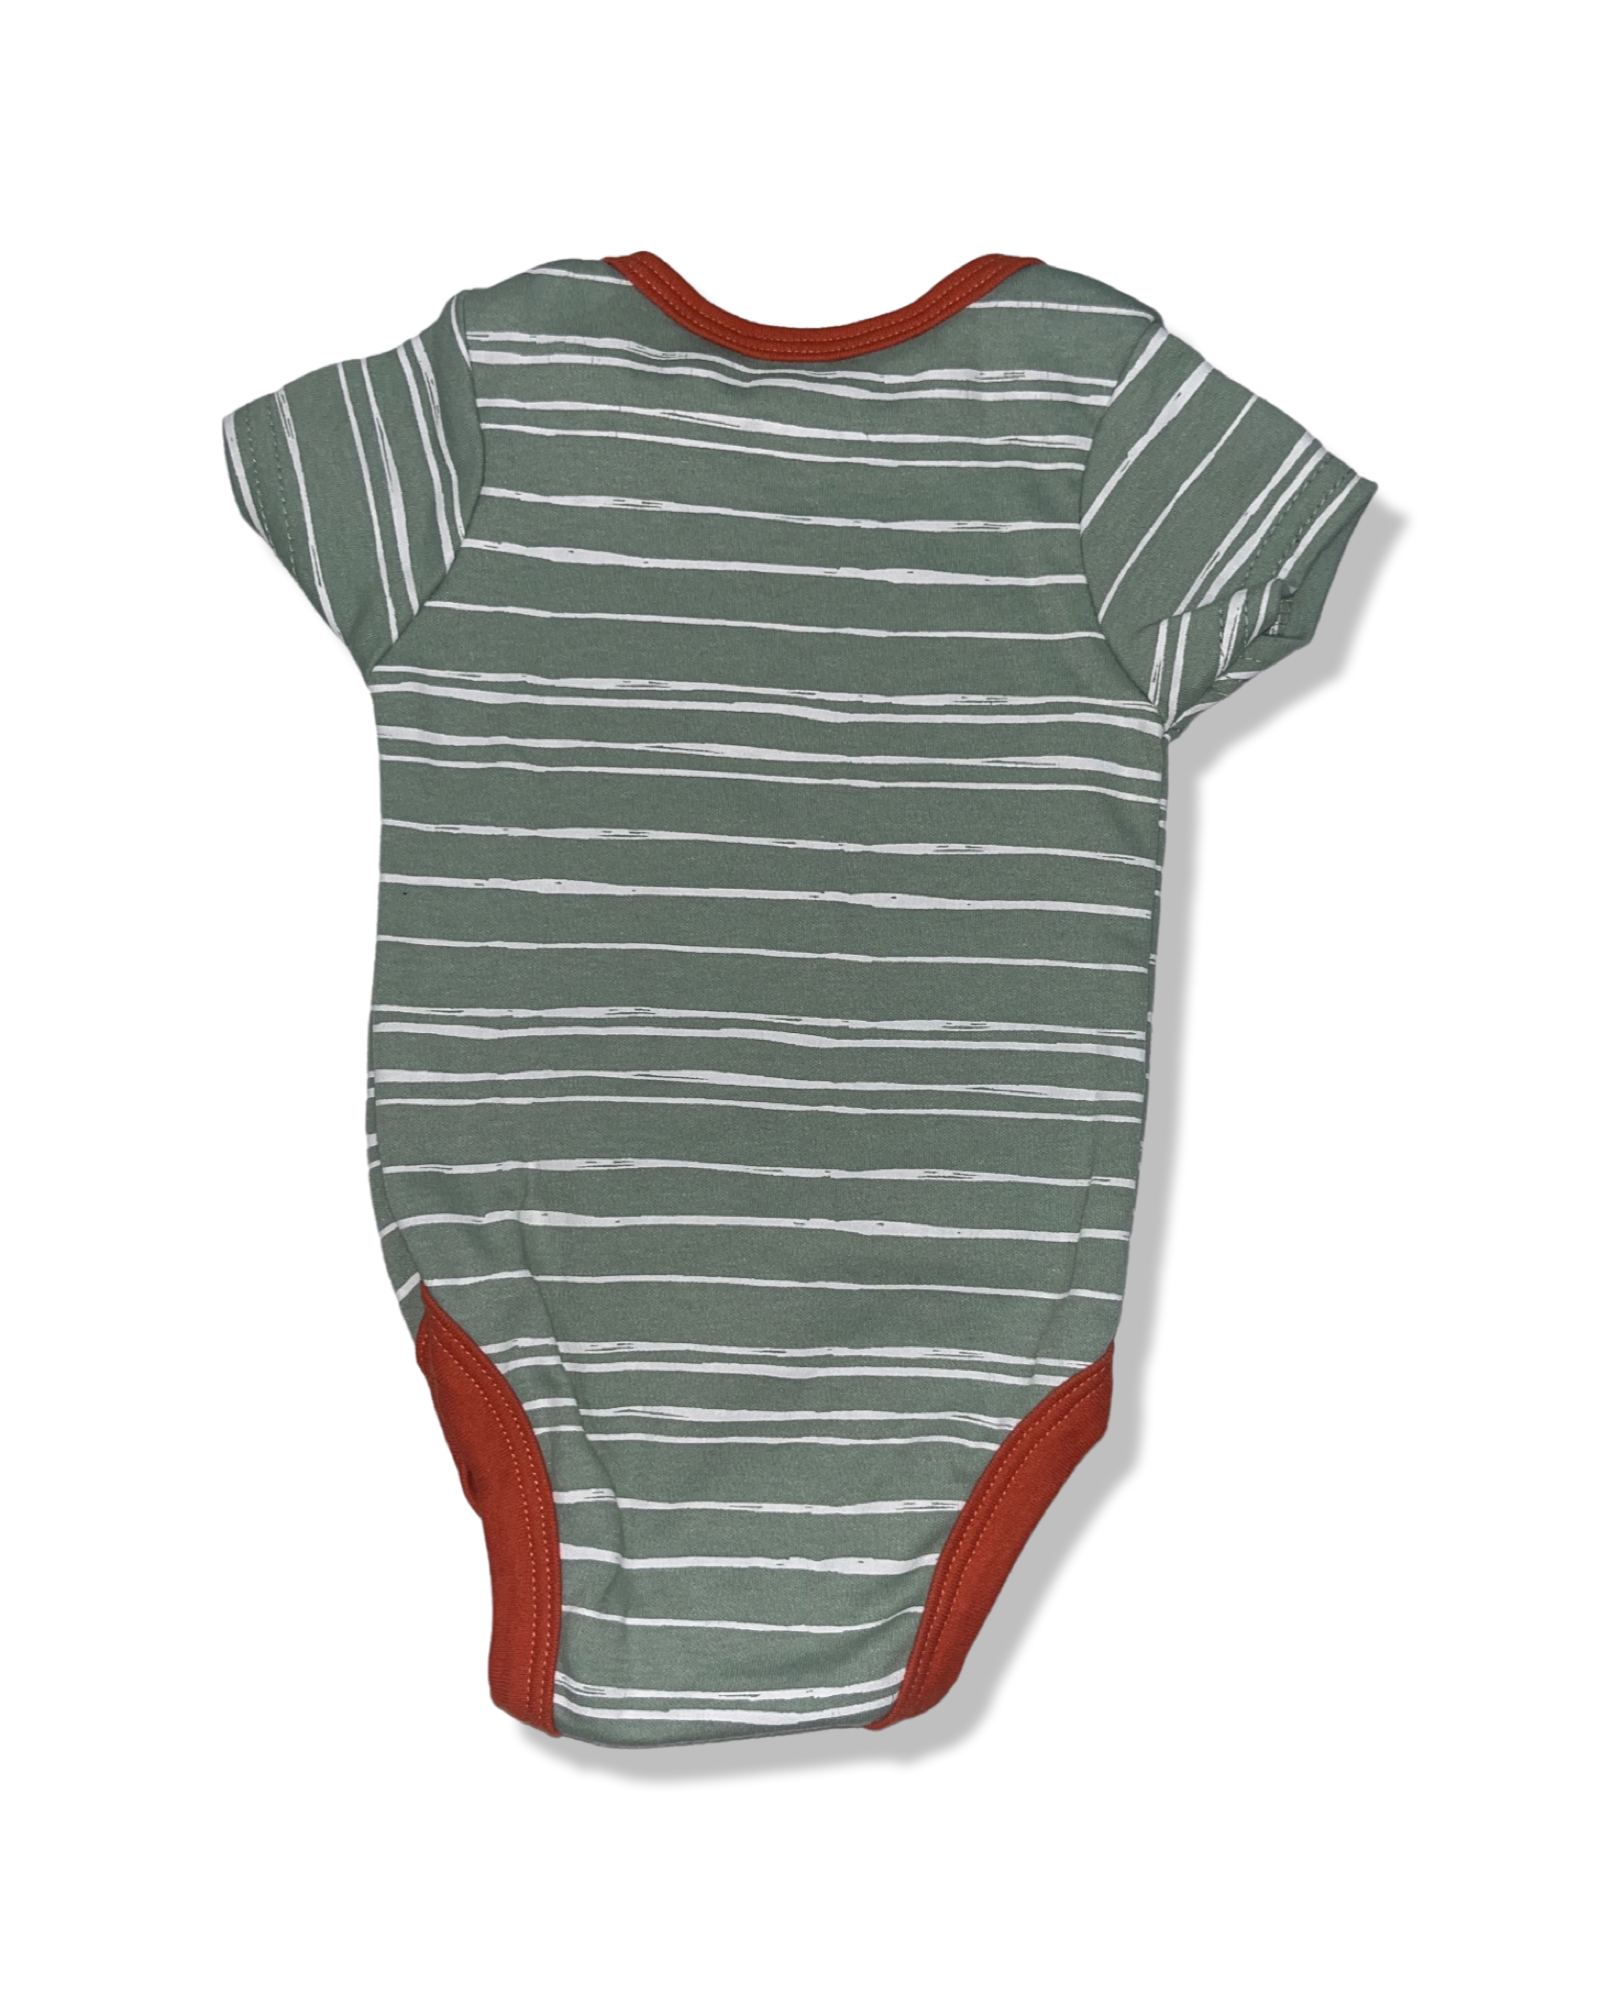 Chick Pea Green with White Stripes Onesie (3-6M)